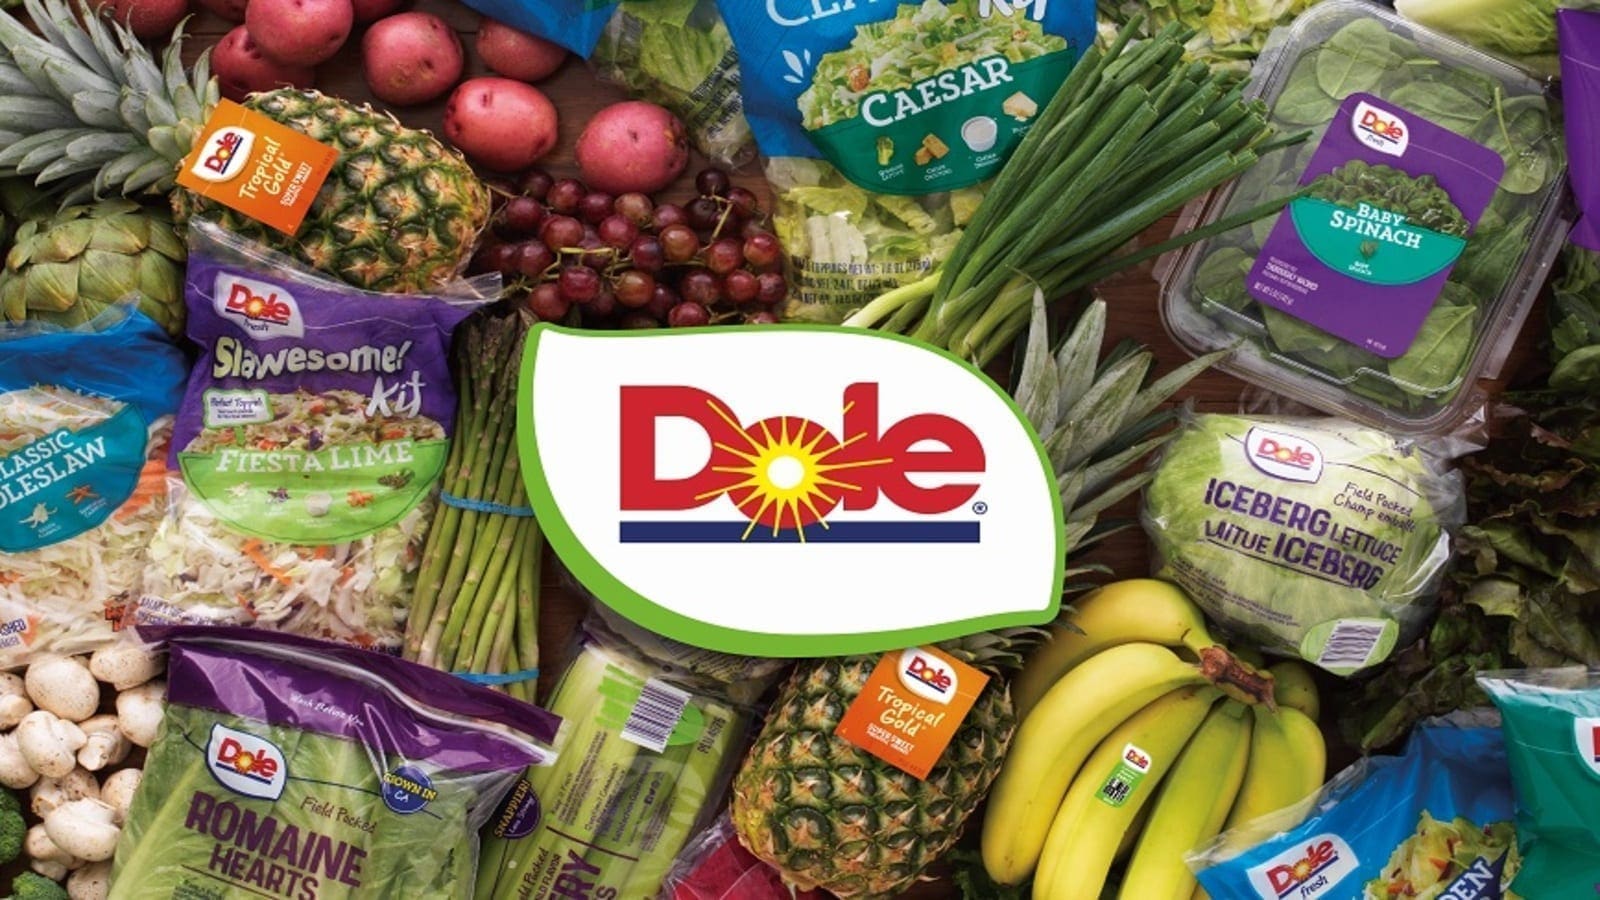 Dole seeks acquisitions to grow its presence in popular produce markets